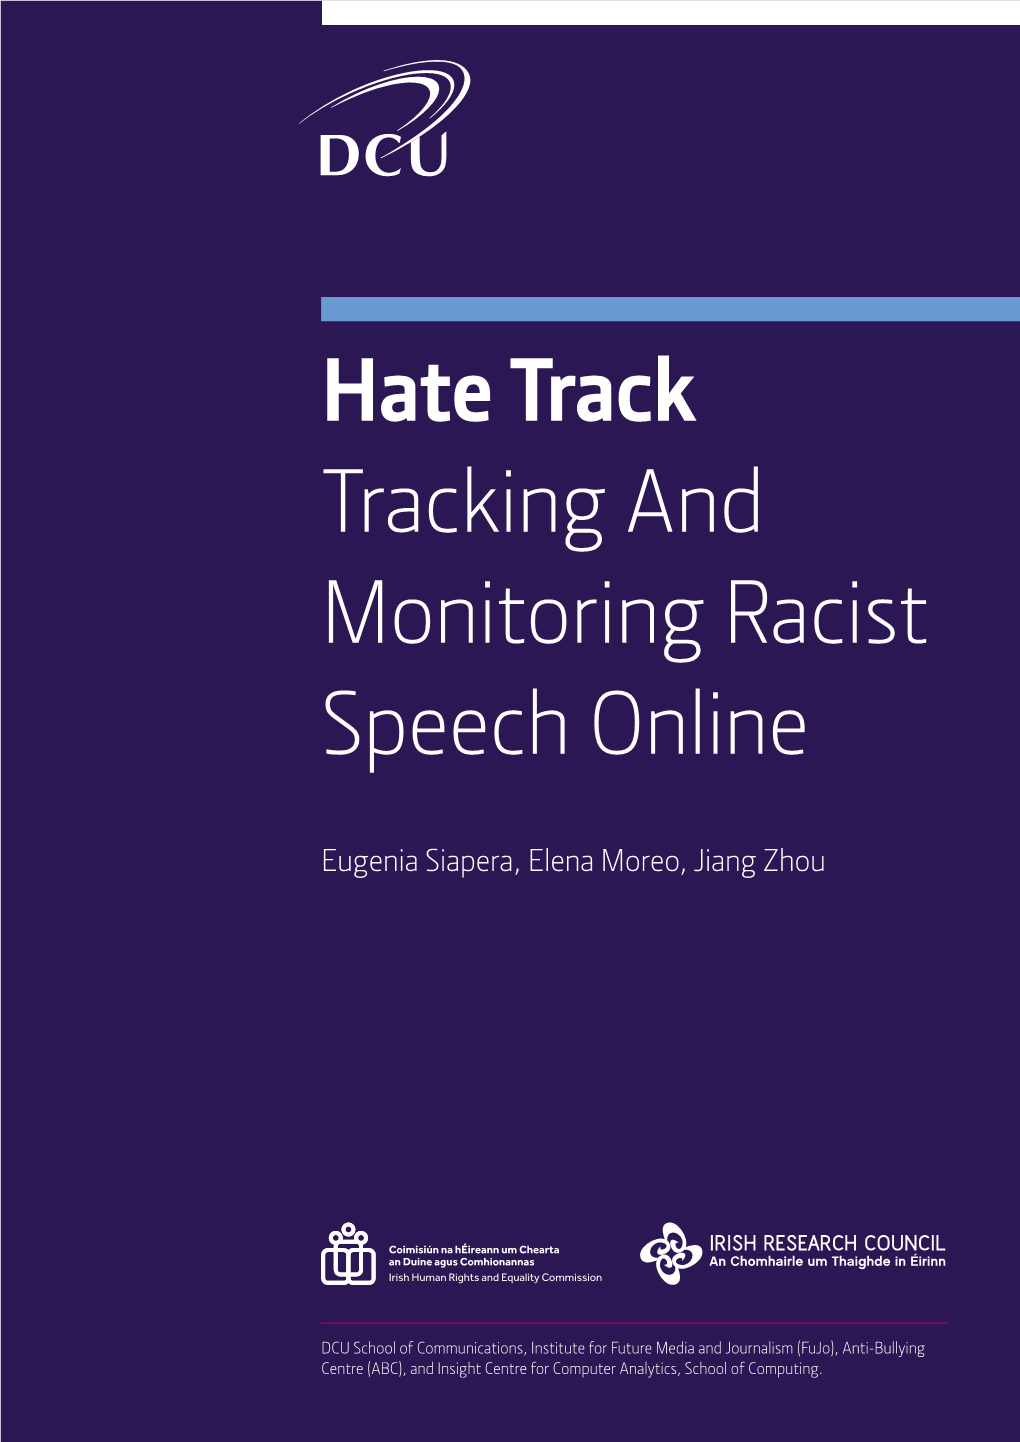 Hate Track Tracking and Monitoring Racist Speech Online